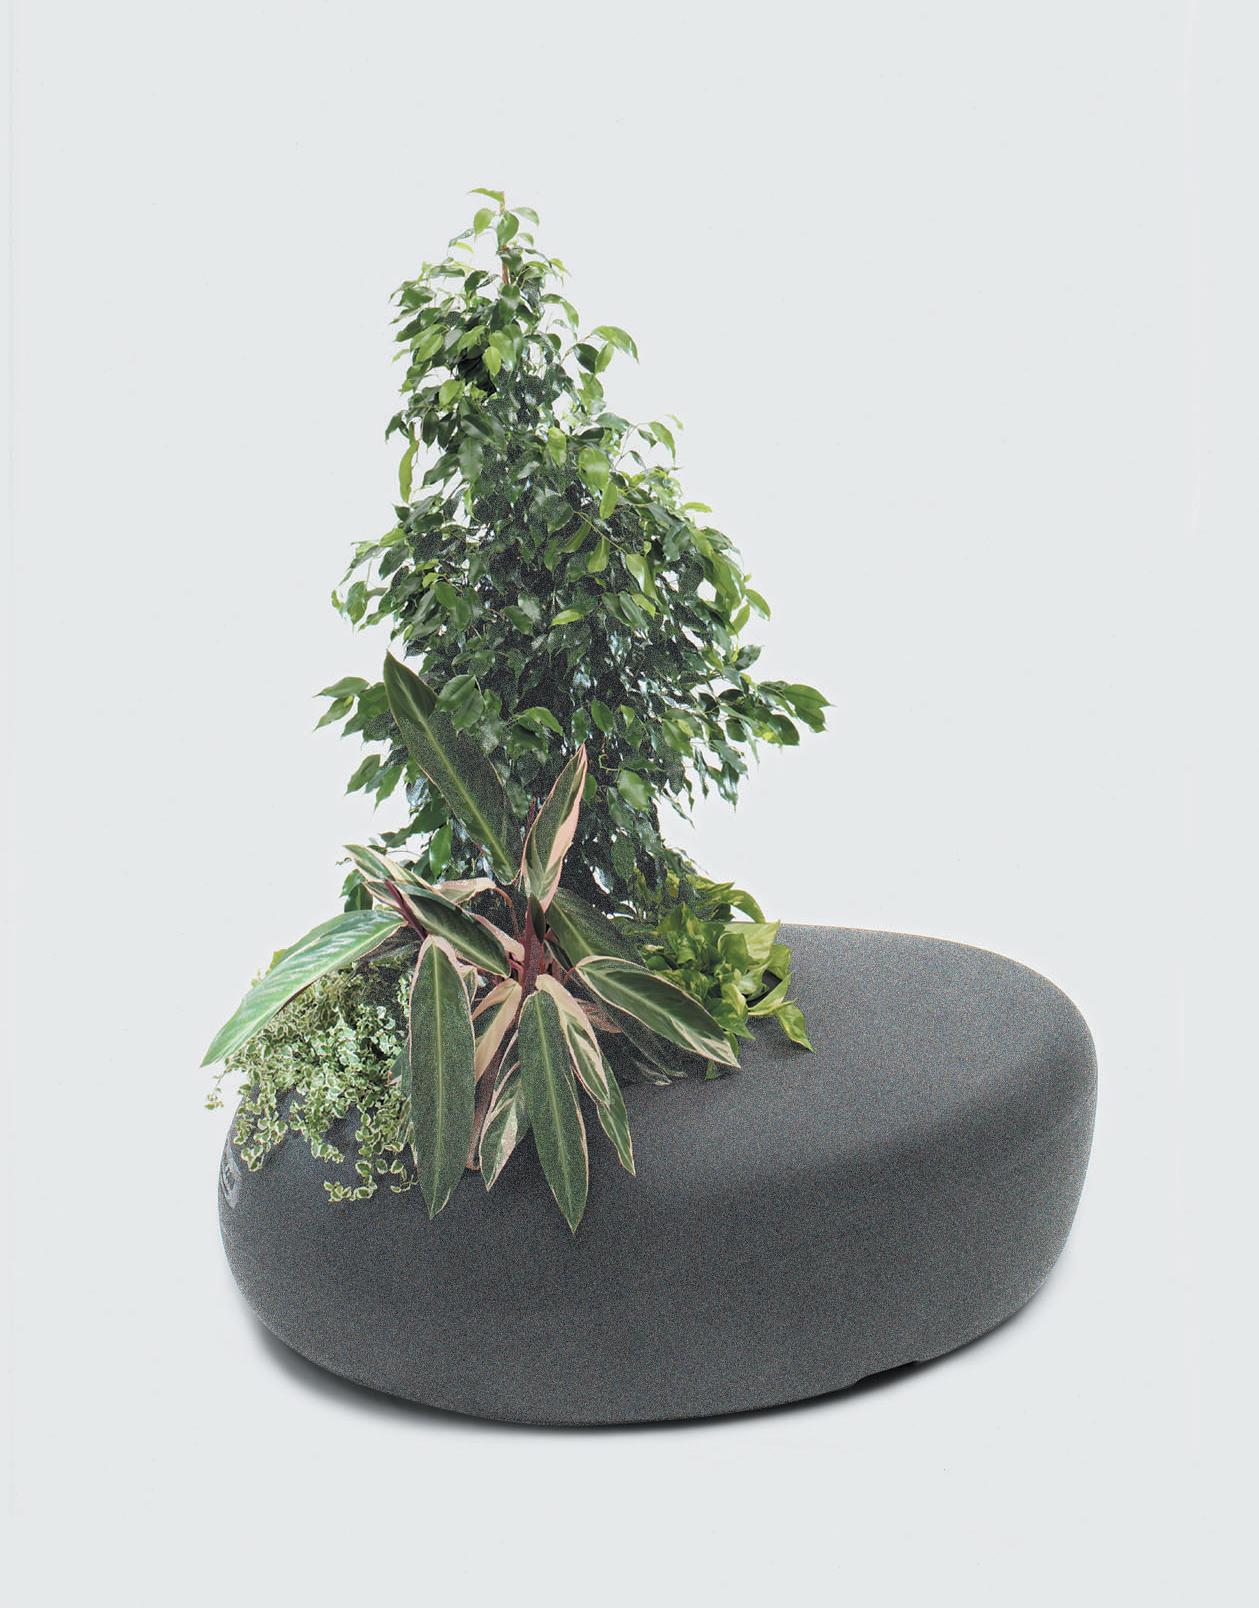 BDLove Planter designed by Ross Lovegrove for BD Barcelona. Lovegrove creates his design motivated by the philosophy and elegance of nature. The shape of this planter flows from nature and the size is considerable which makes it more combined with